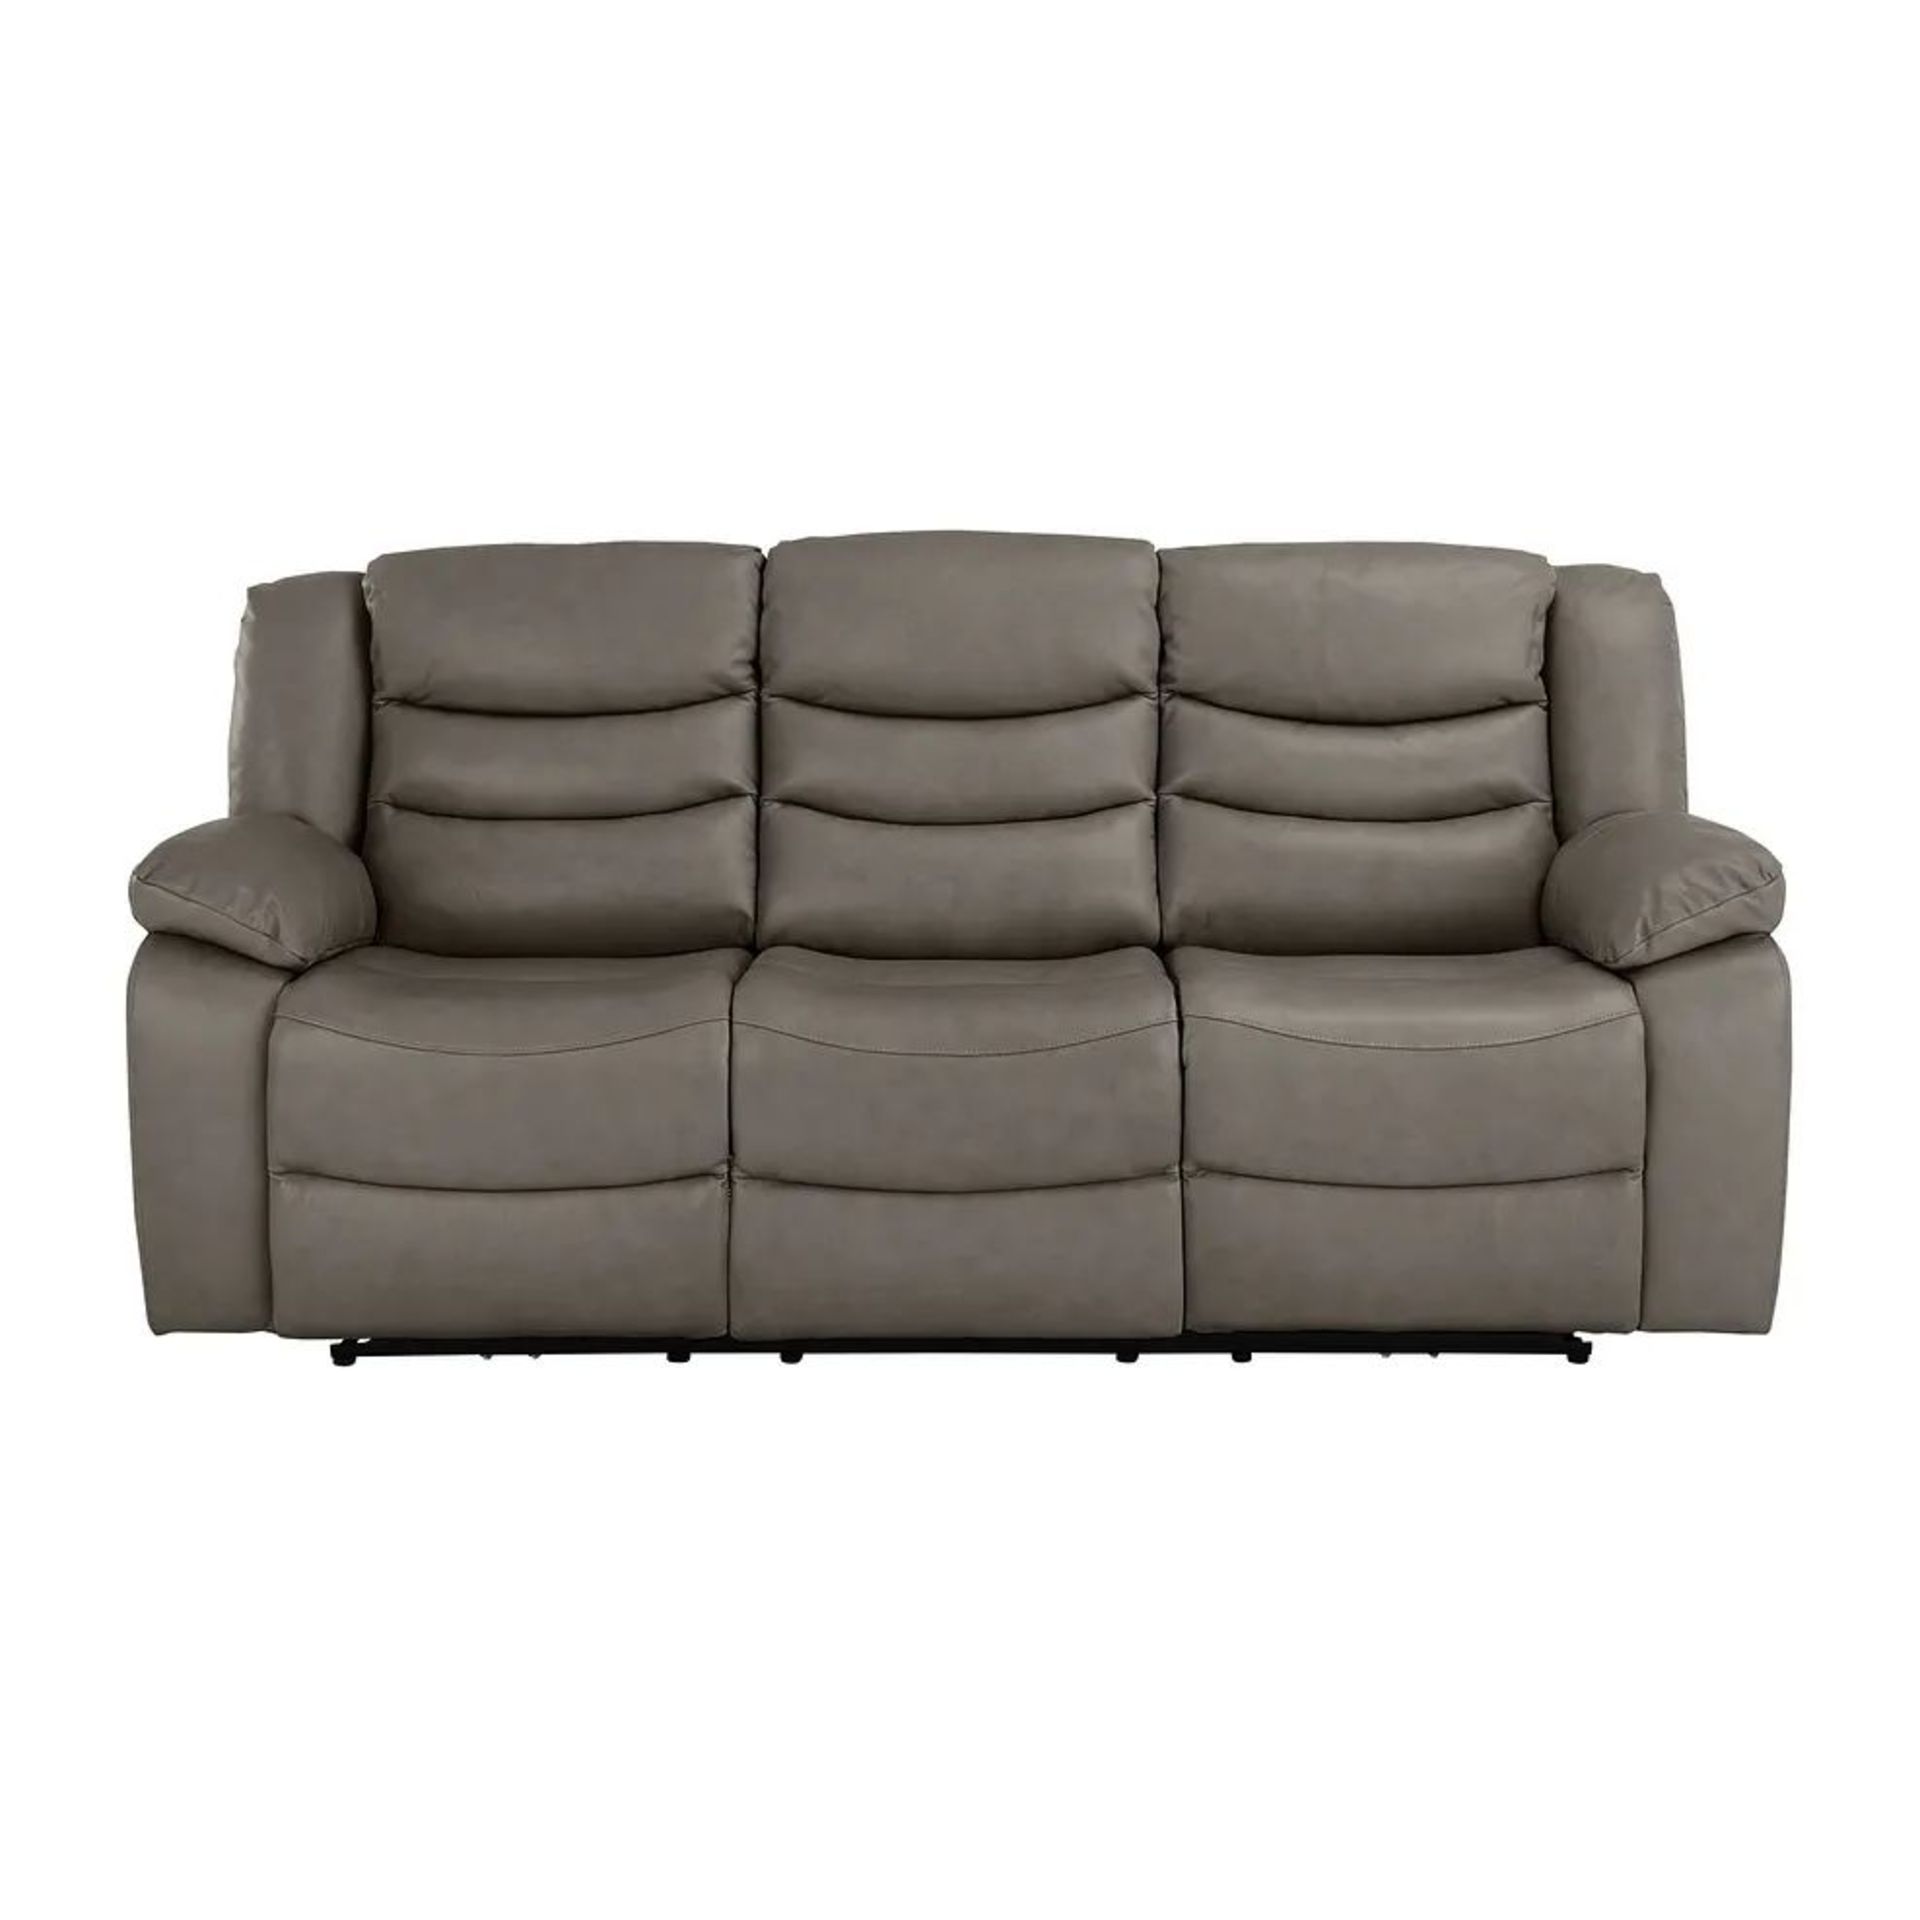 BRAND NEW MARLOW 3 Seater Electric Recliner Sofa - DARK GREY LEATHER. RRP £1849. Our Marlow - Bild 2 aus 11